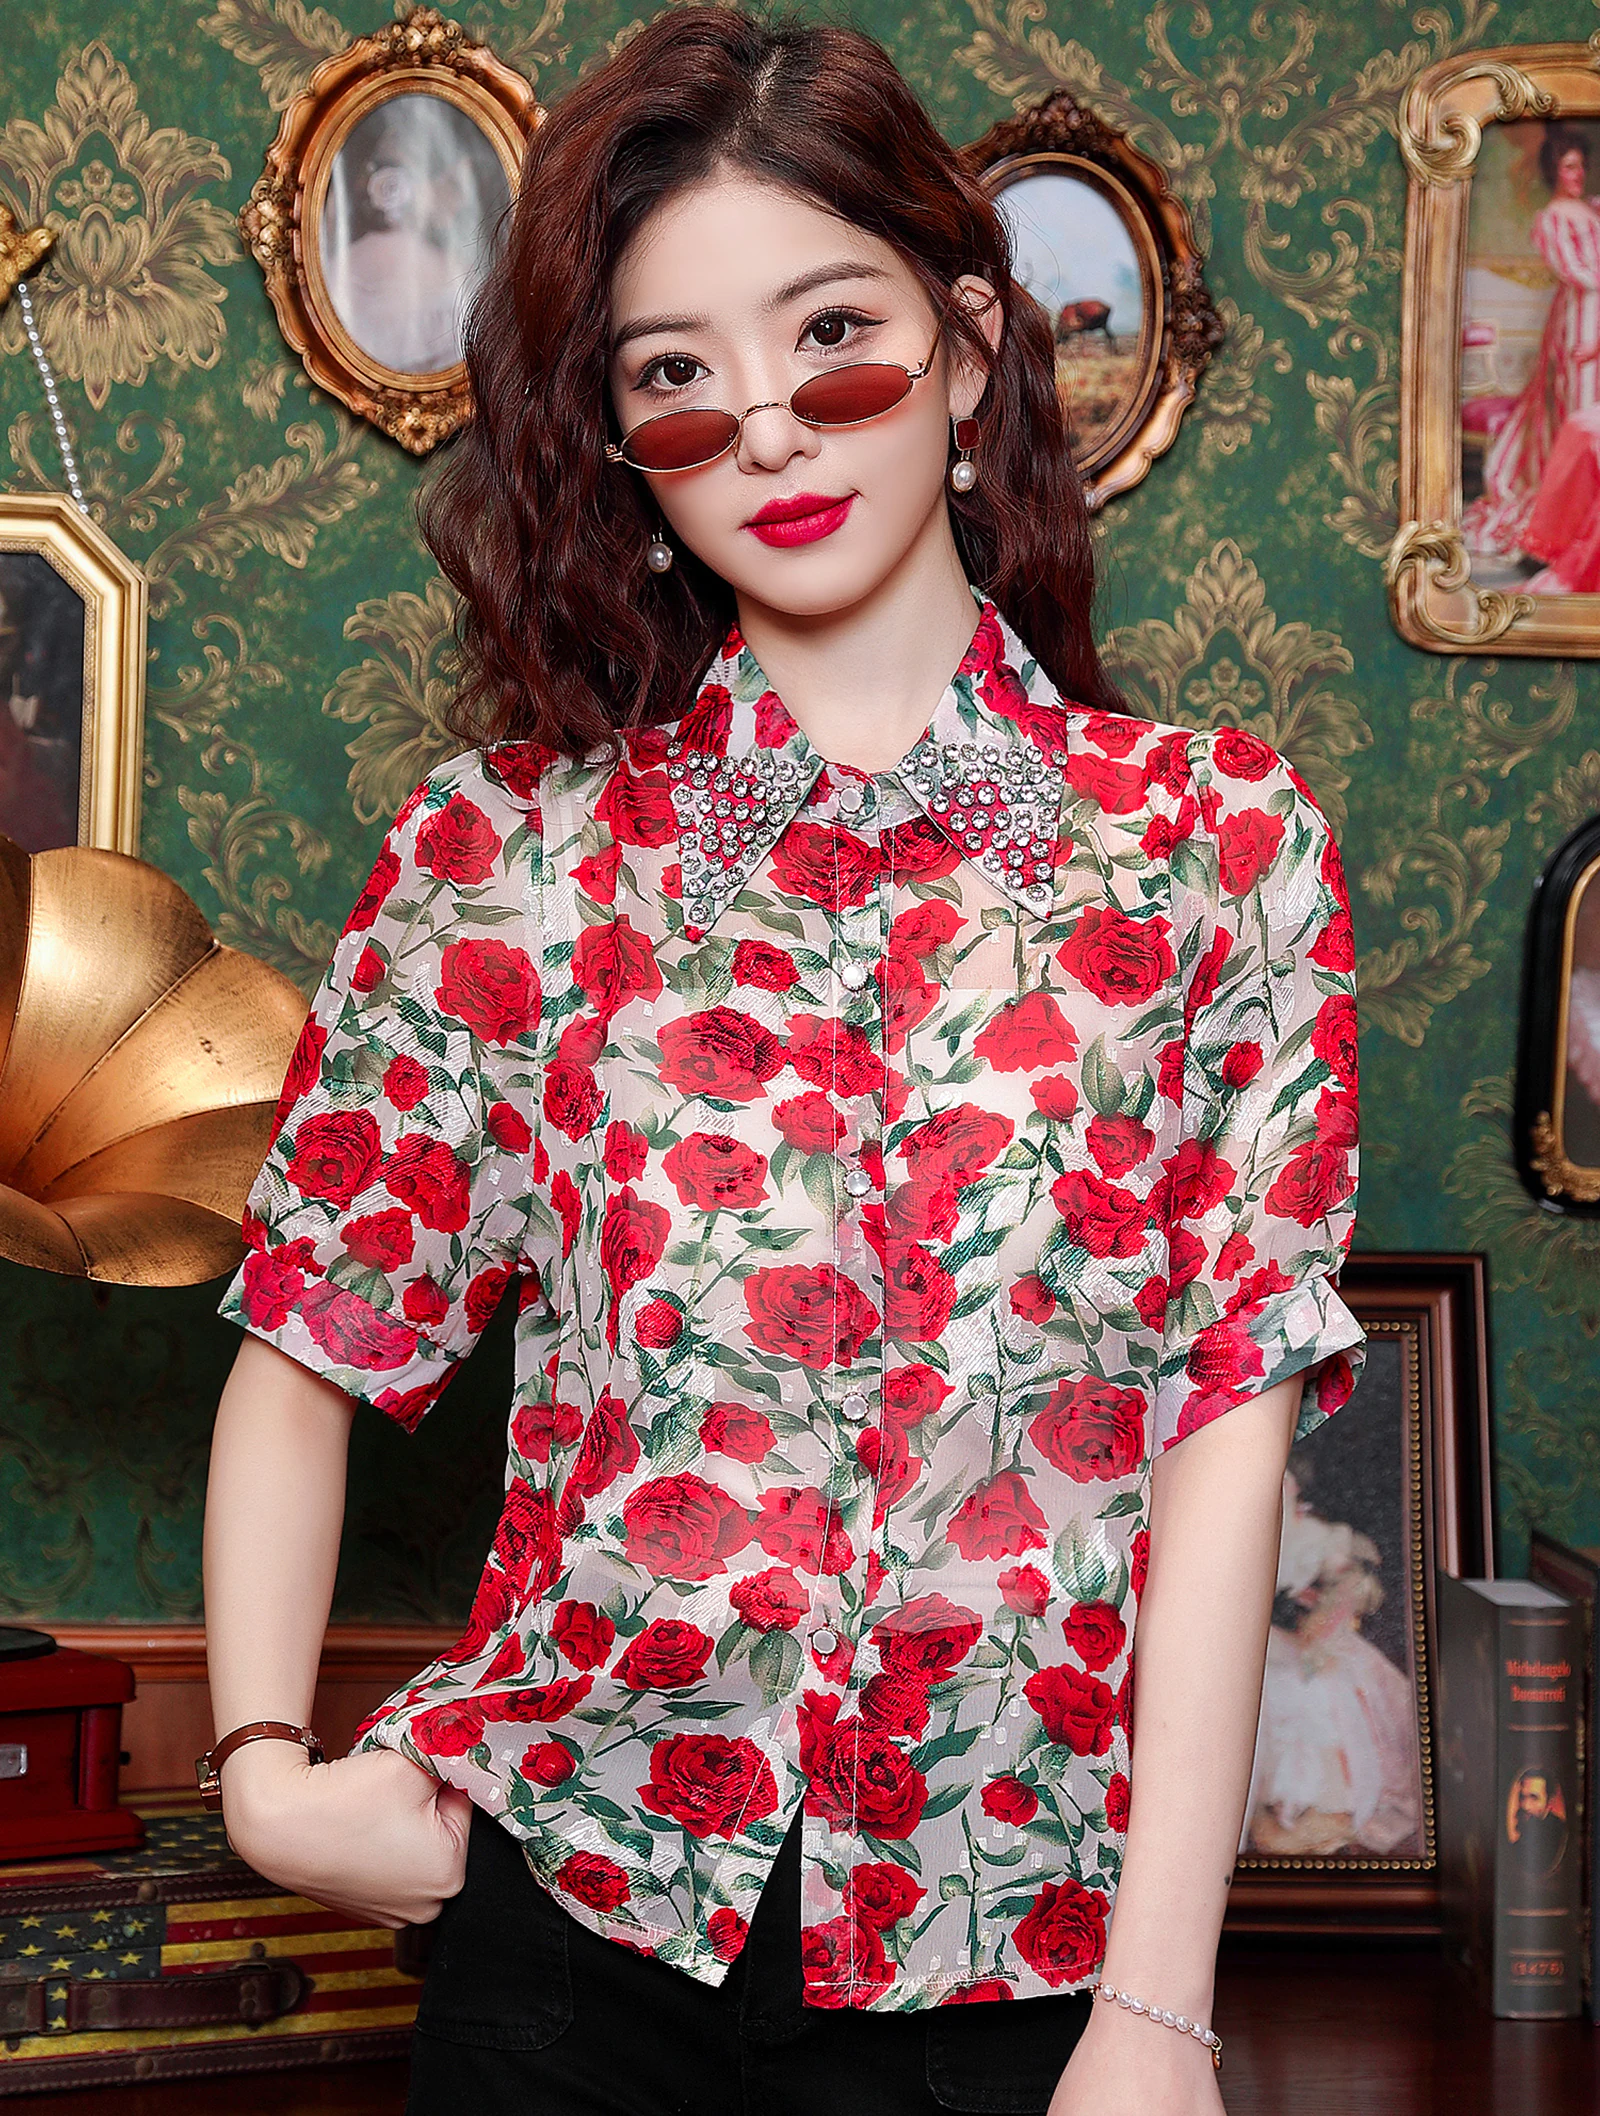 Women's Fashionable Red Floral Printed Chiffon Casual Shirt Blouse01